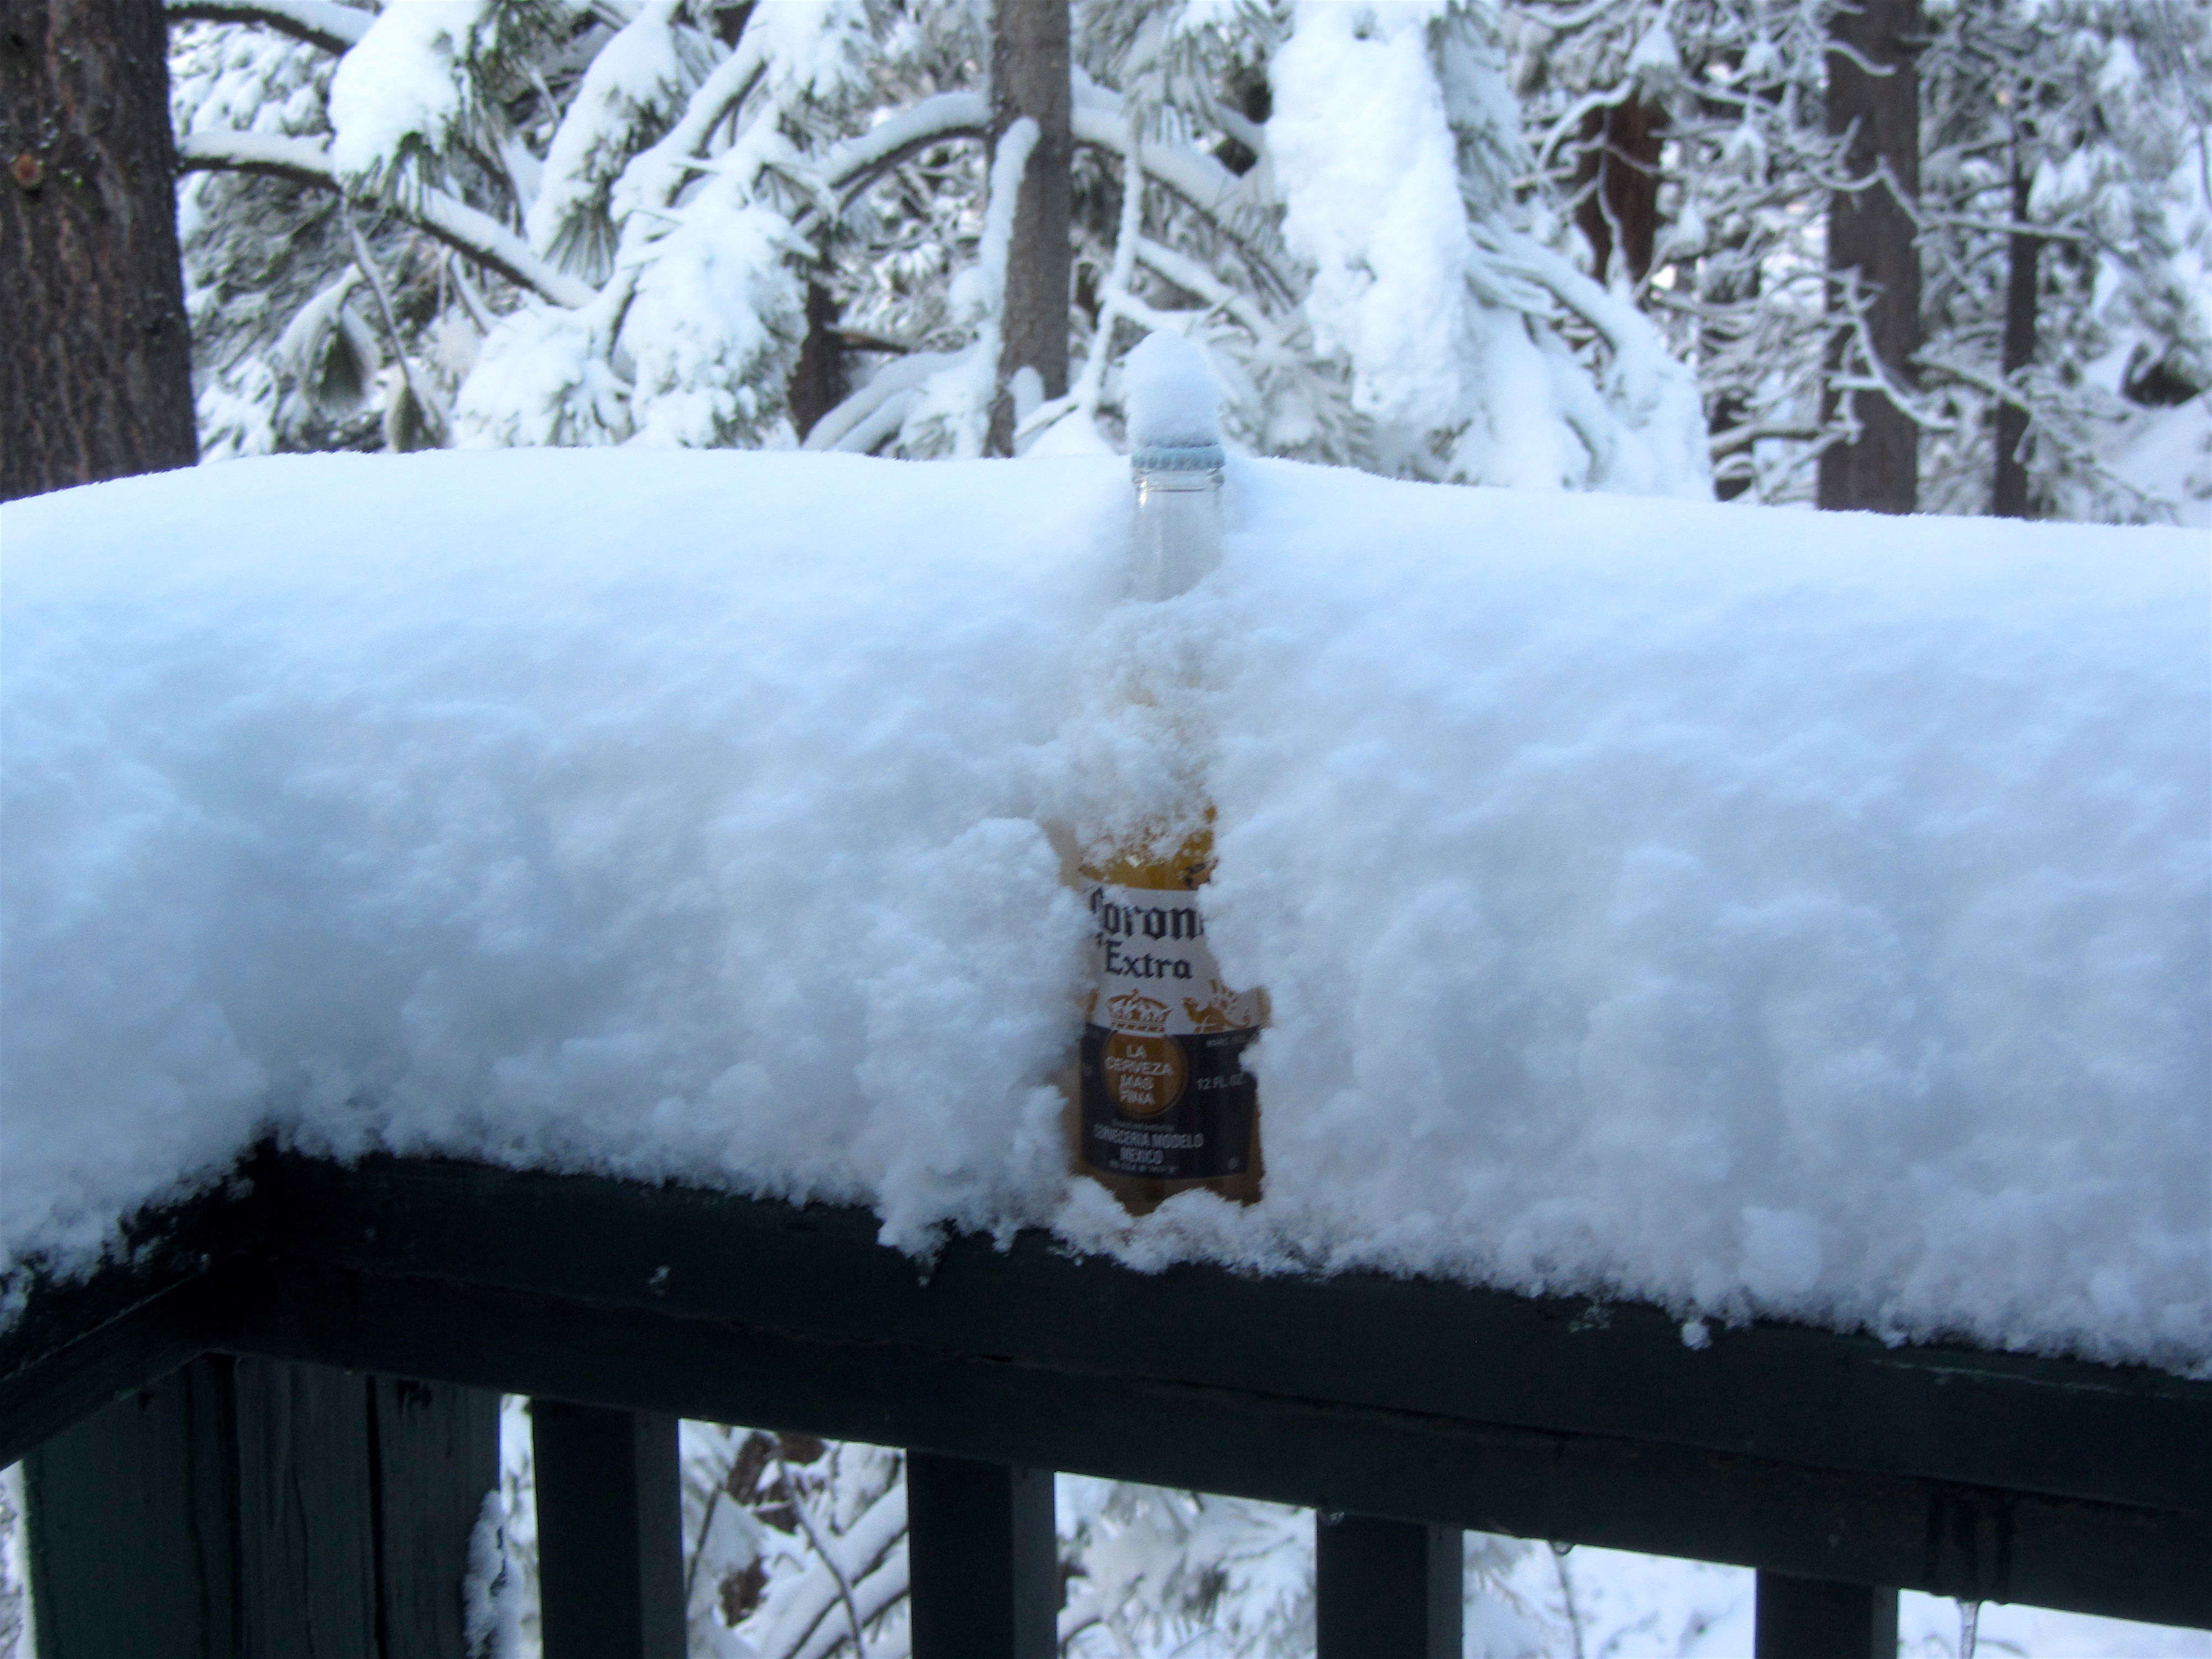 Corona deep on the railing in Squaw Valley this morning. photo: snowbrains